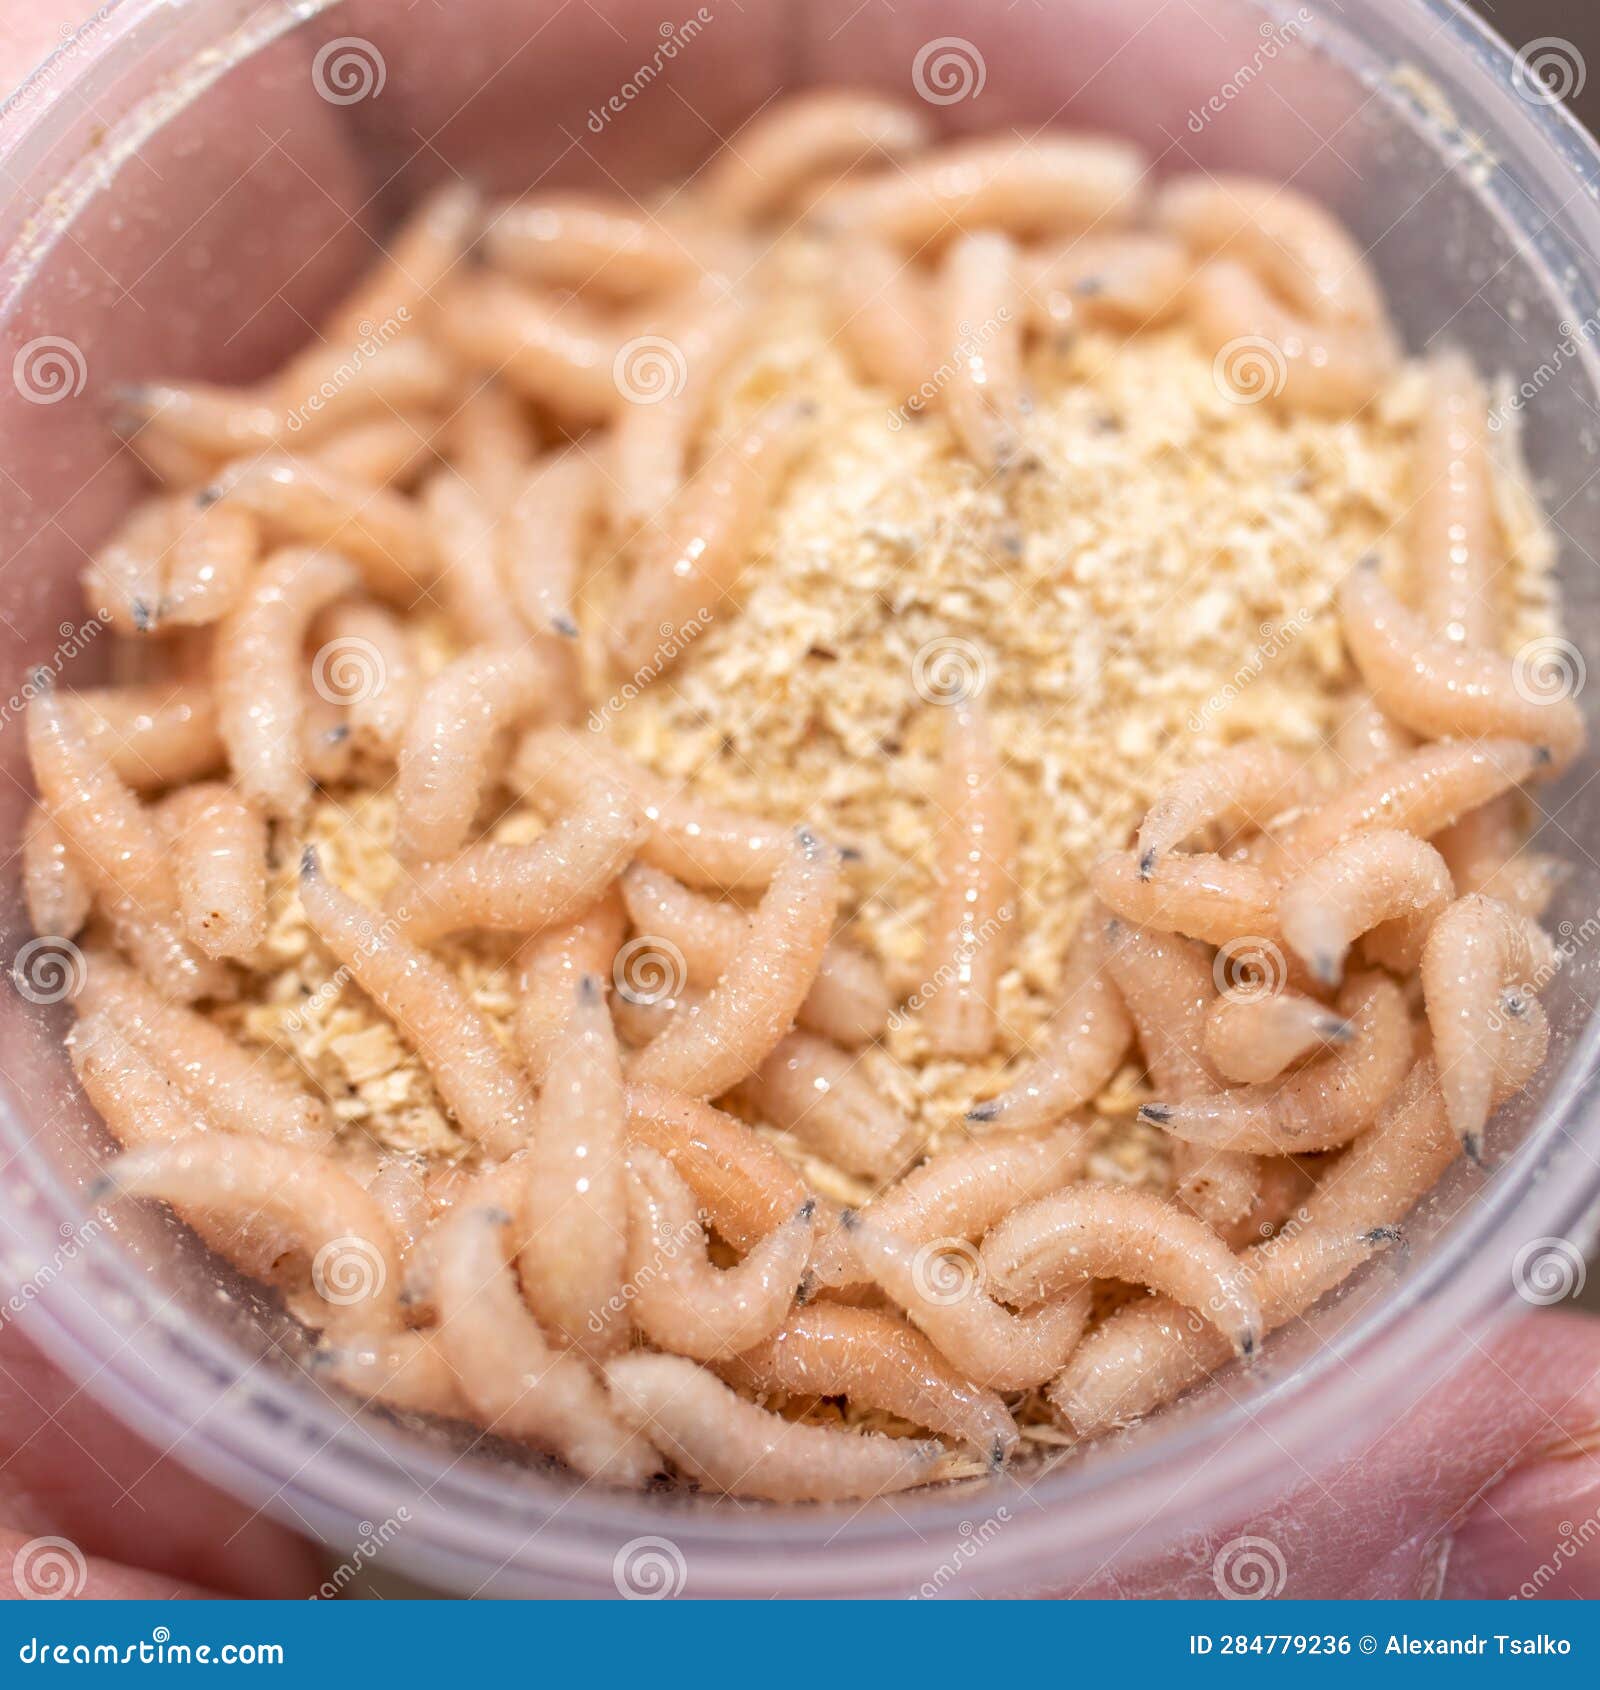 Box with Maggots for Fishing. Fly Larvae Bait for Fishermen Stock Photo -  Image of experiment, group: 284779236